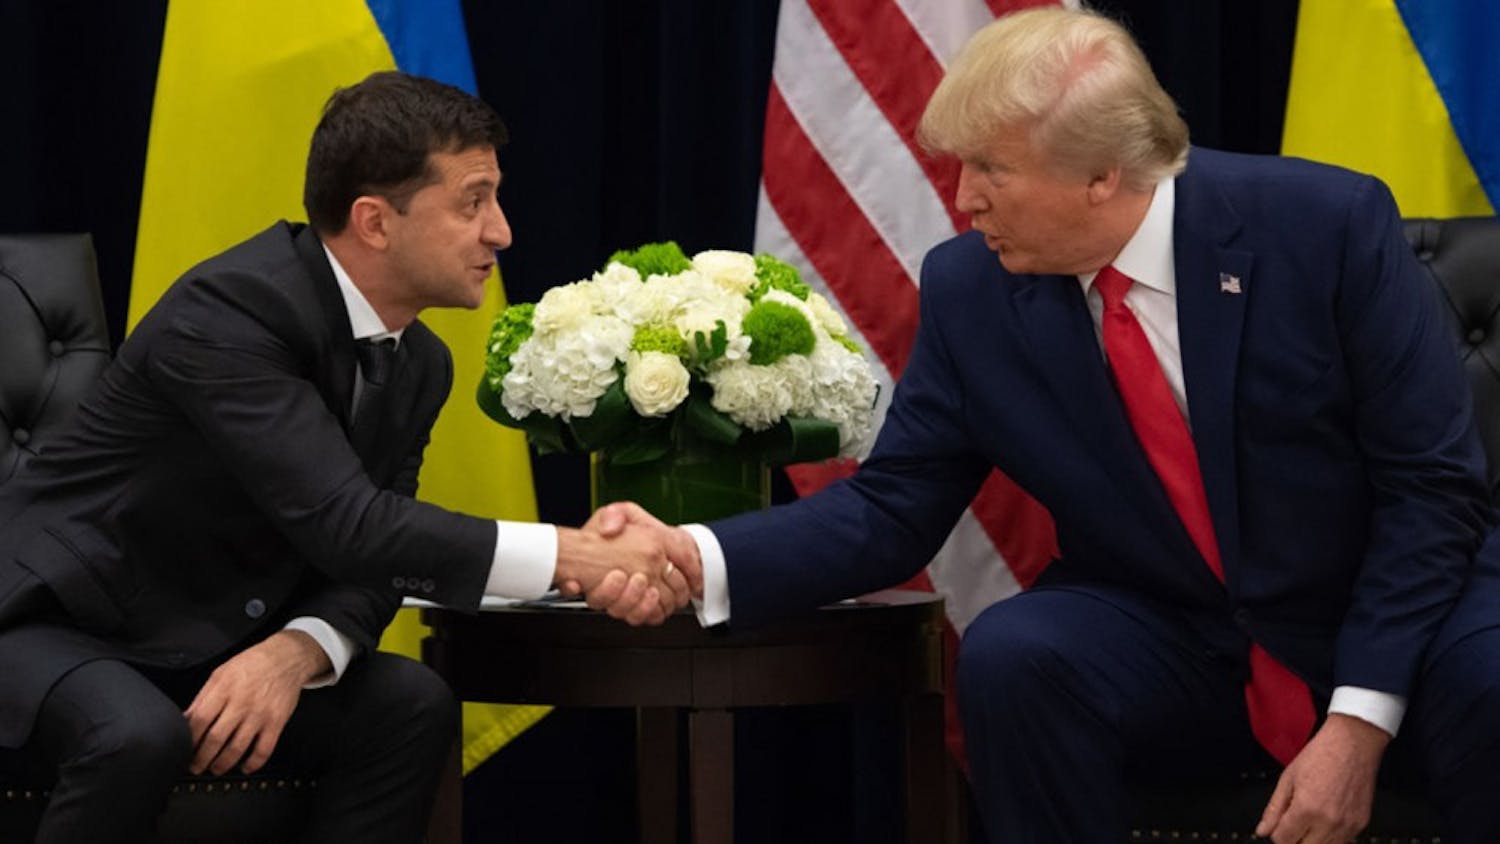 President Donald Trump and Ukrainian President Volodymyr Zelensky shake hands during a meeting Sept. 25 on the sidelines of the United Nations General Assembly in New York.